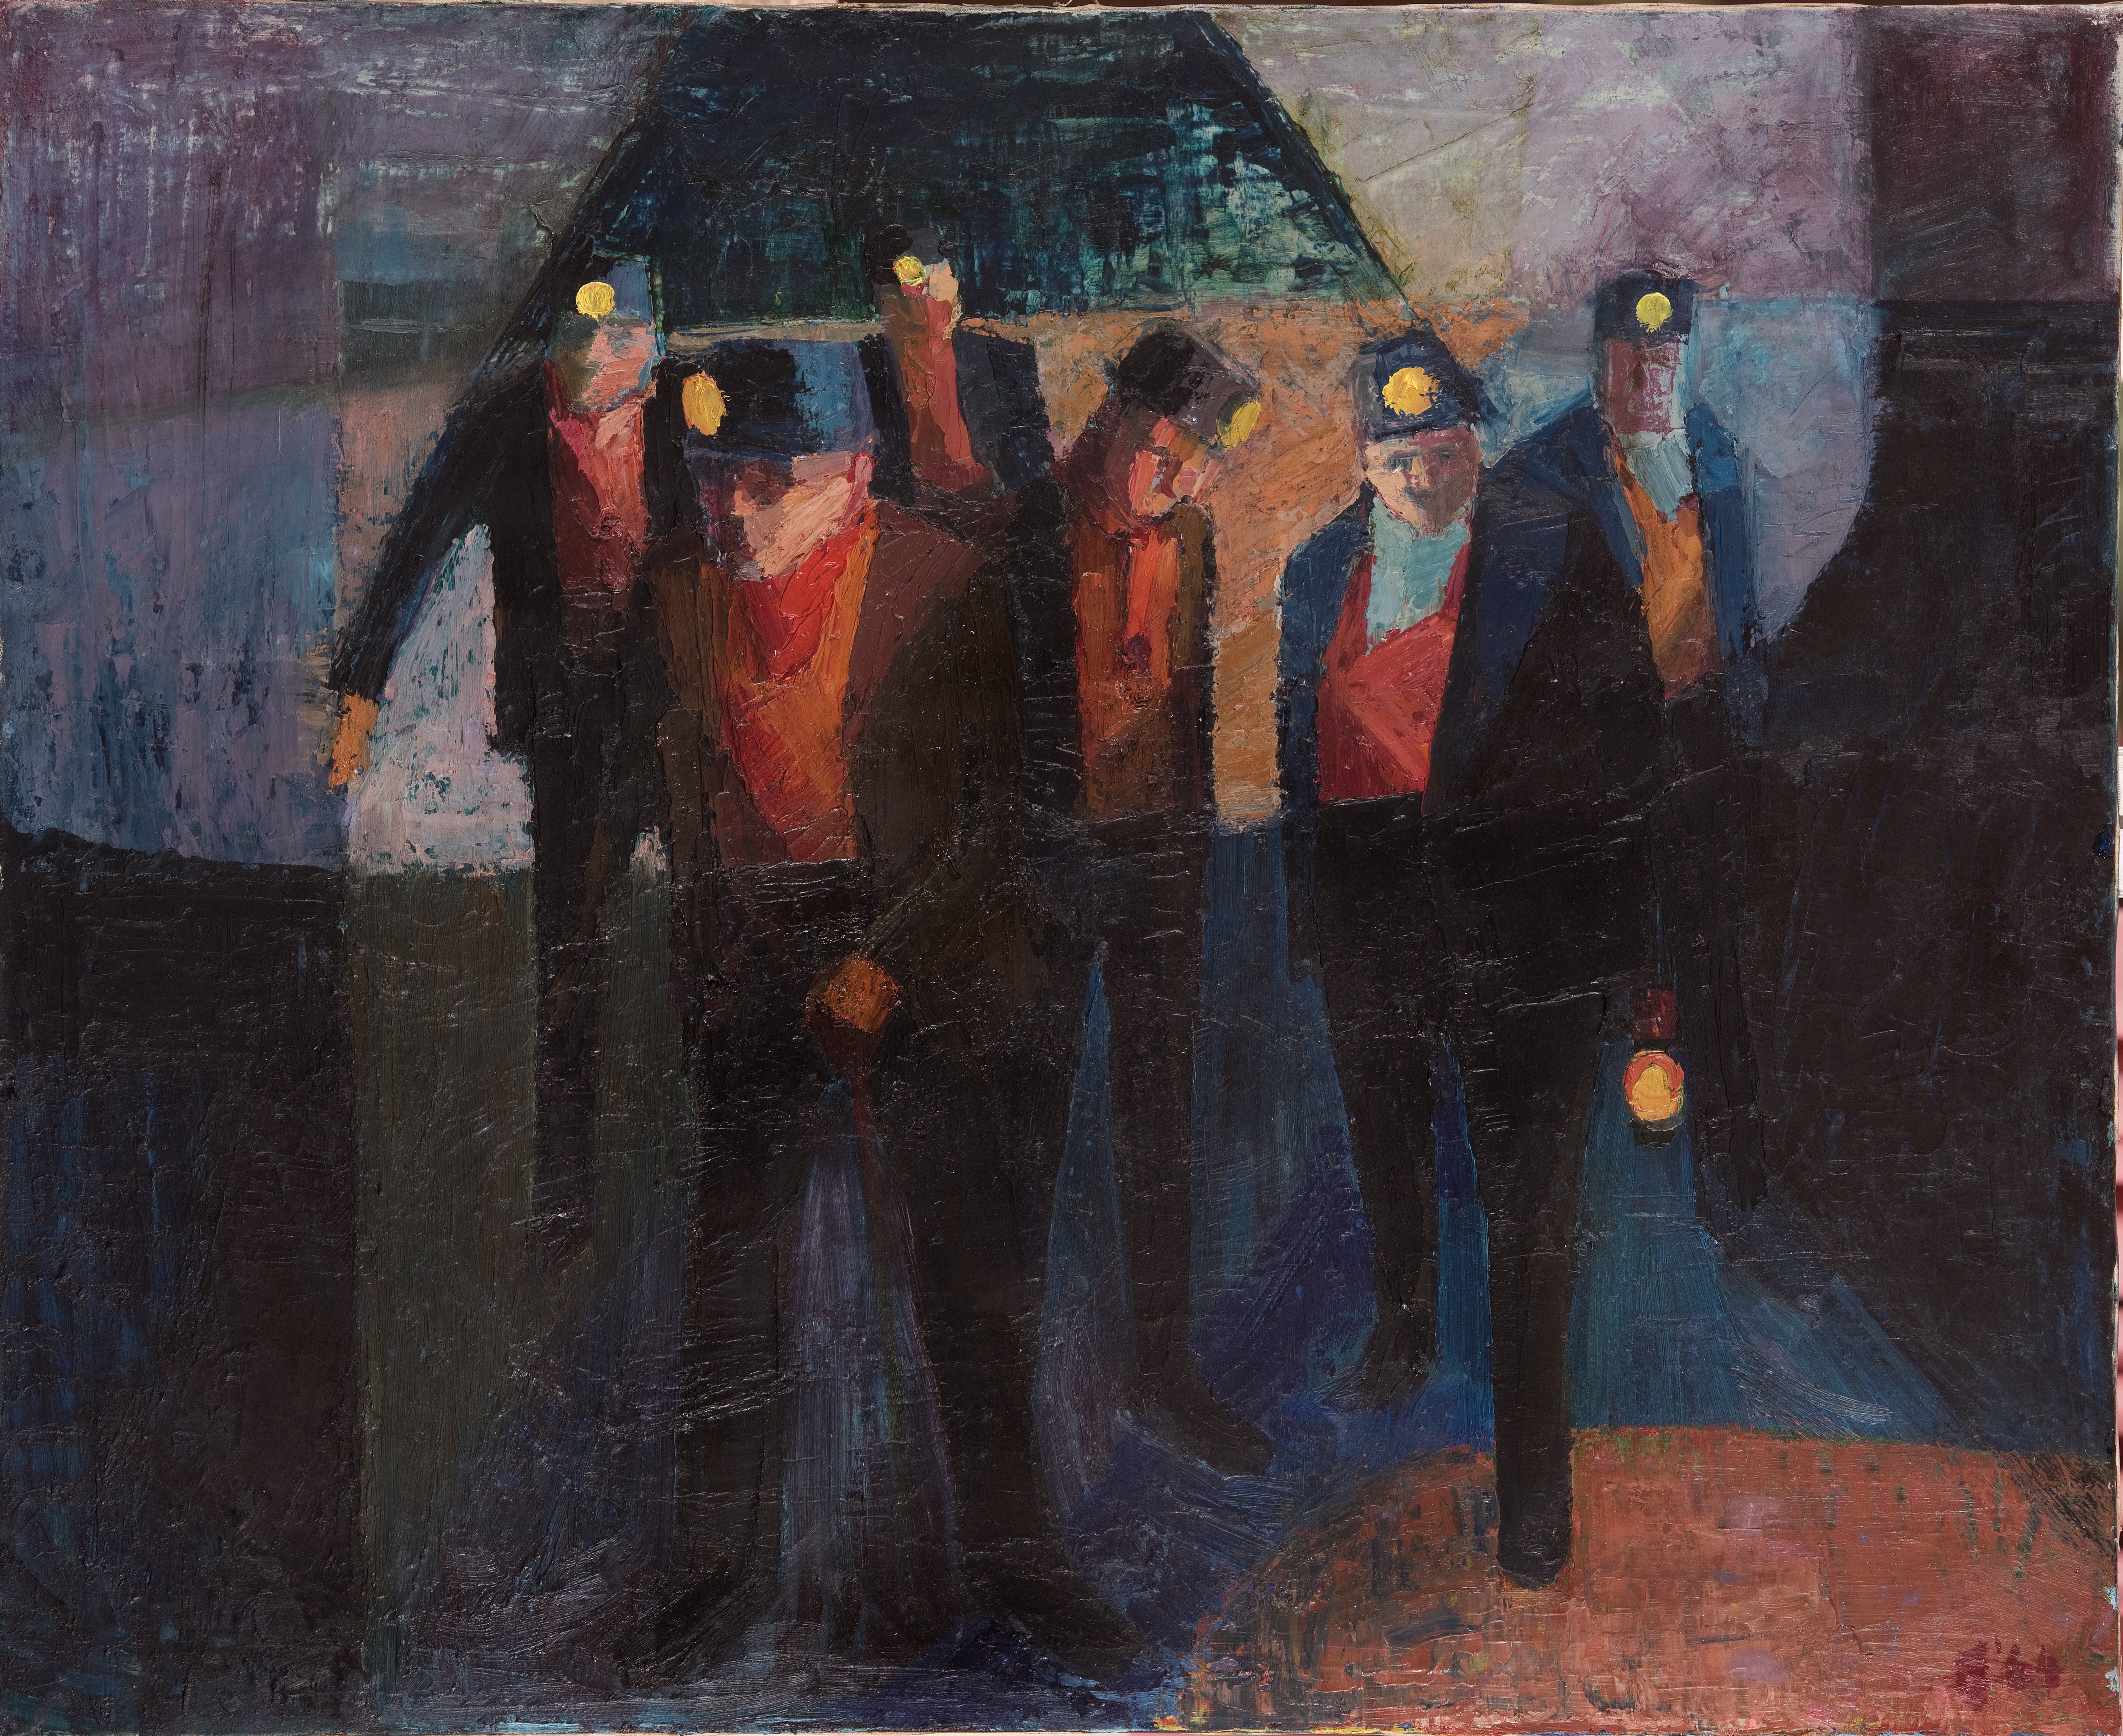 Bevin Boys by Ted Holloway, 1964. Oil. 690mm x 840mm. Photograph: Colin Davison. Copyright: The Ted Holloway Estate. Courtesy of The Auckland Project.